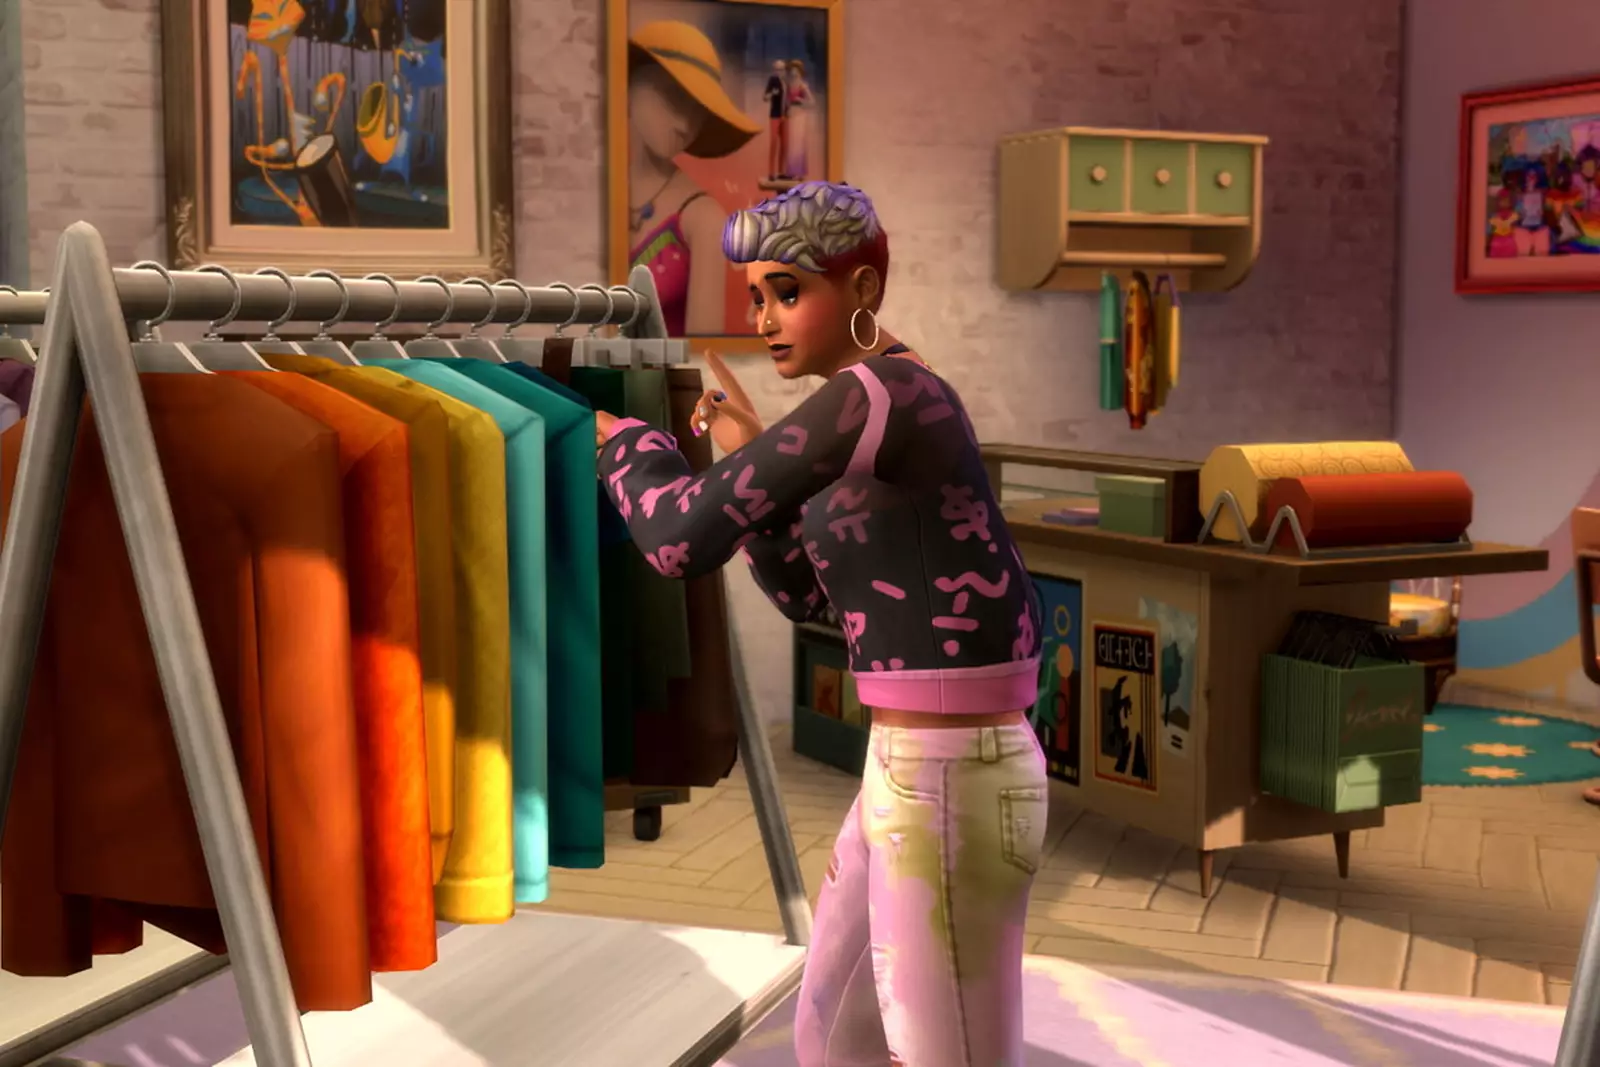 SUSTAINABLE SHOPPING IN THE METAVERSE: DEPOP X THE SIMS 4 — AW